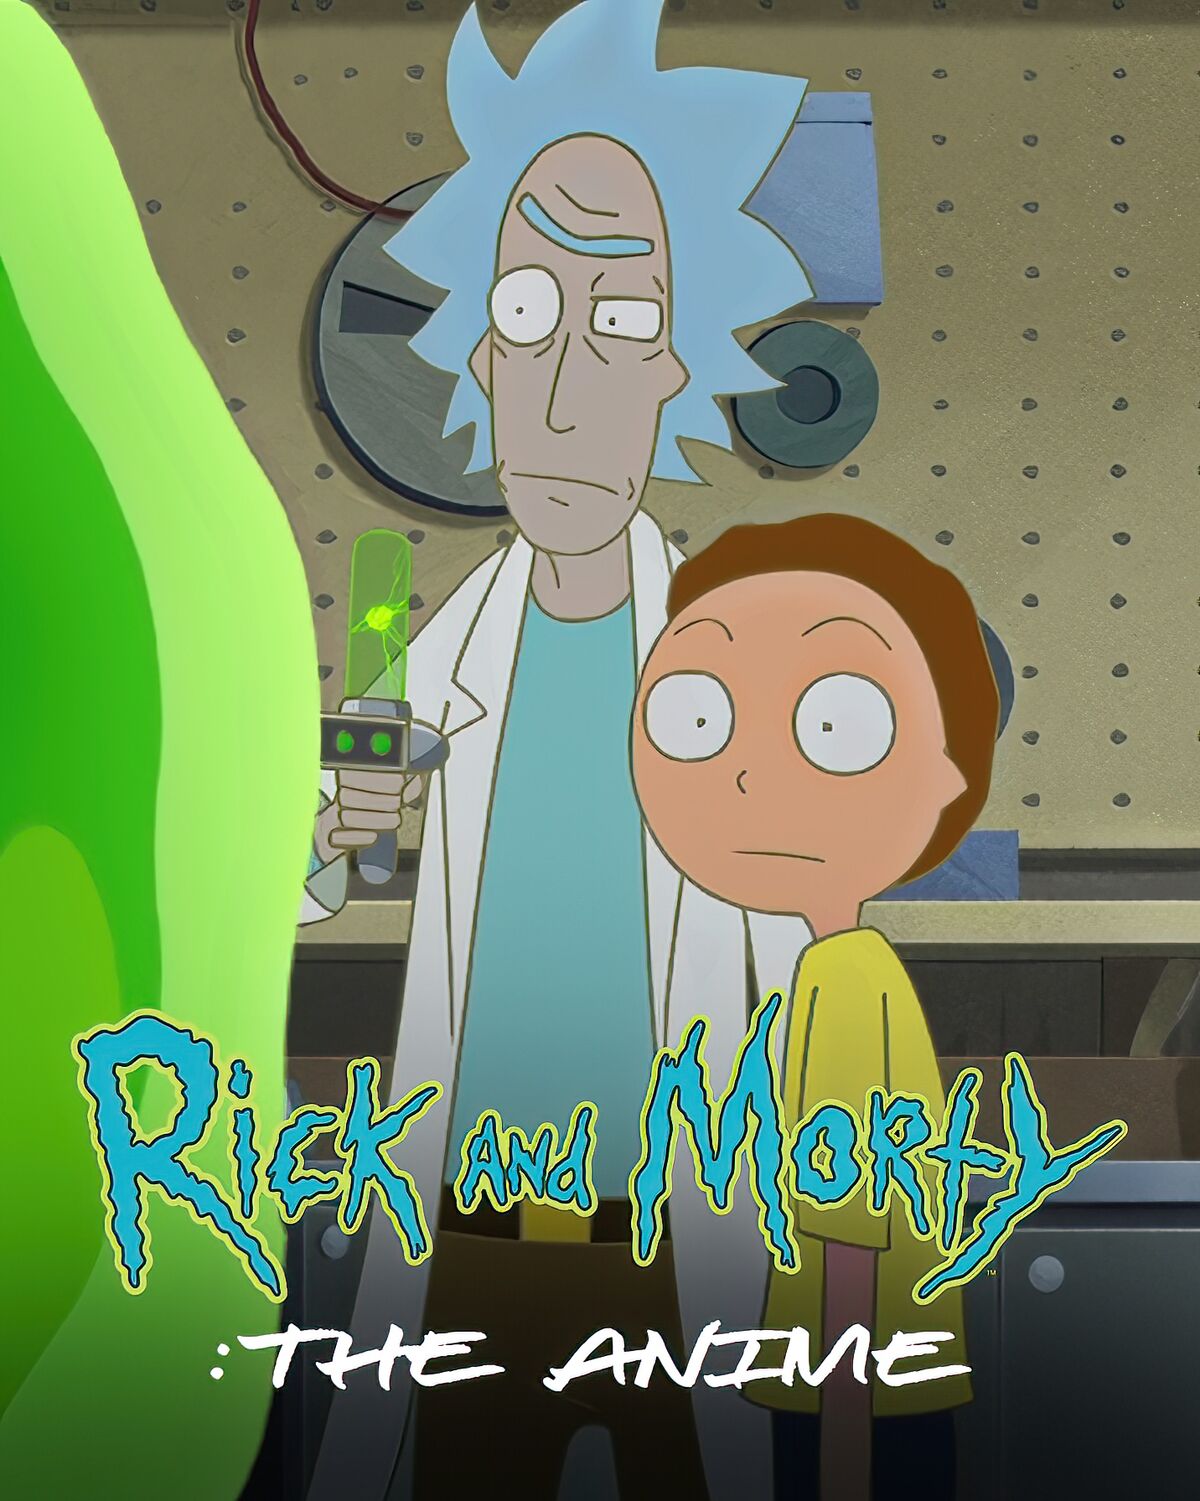 Rick and Morty season 7: Release date, cast and latest news